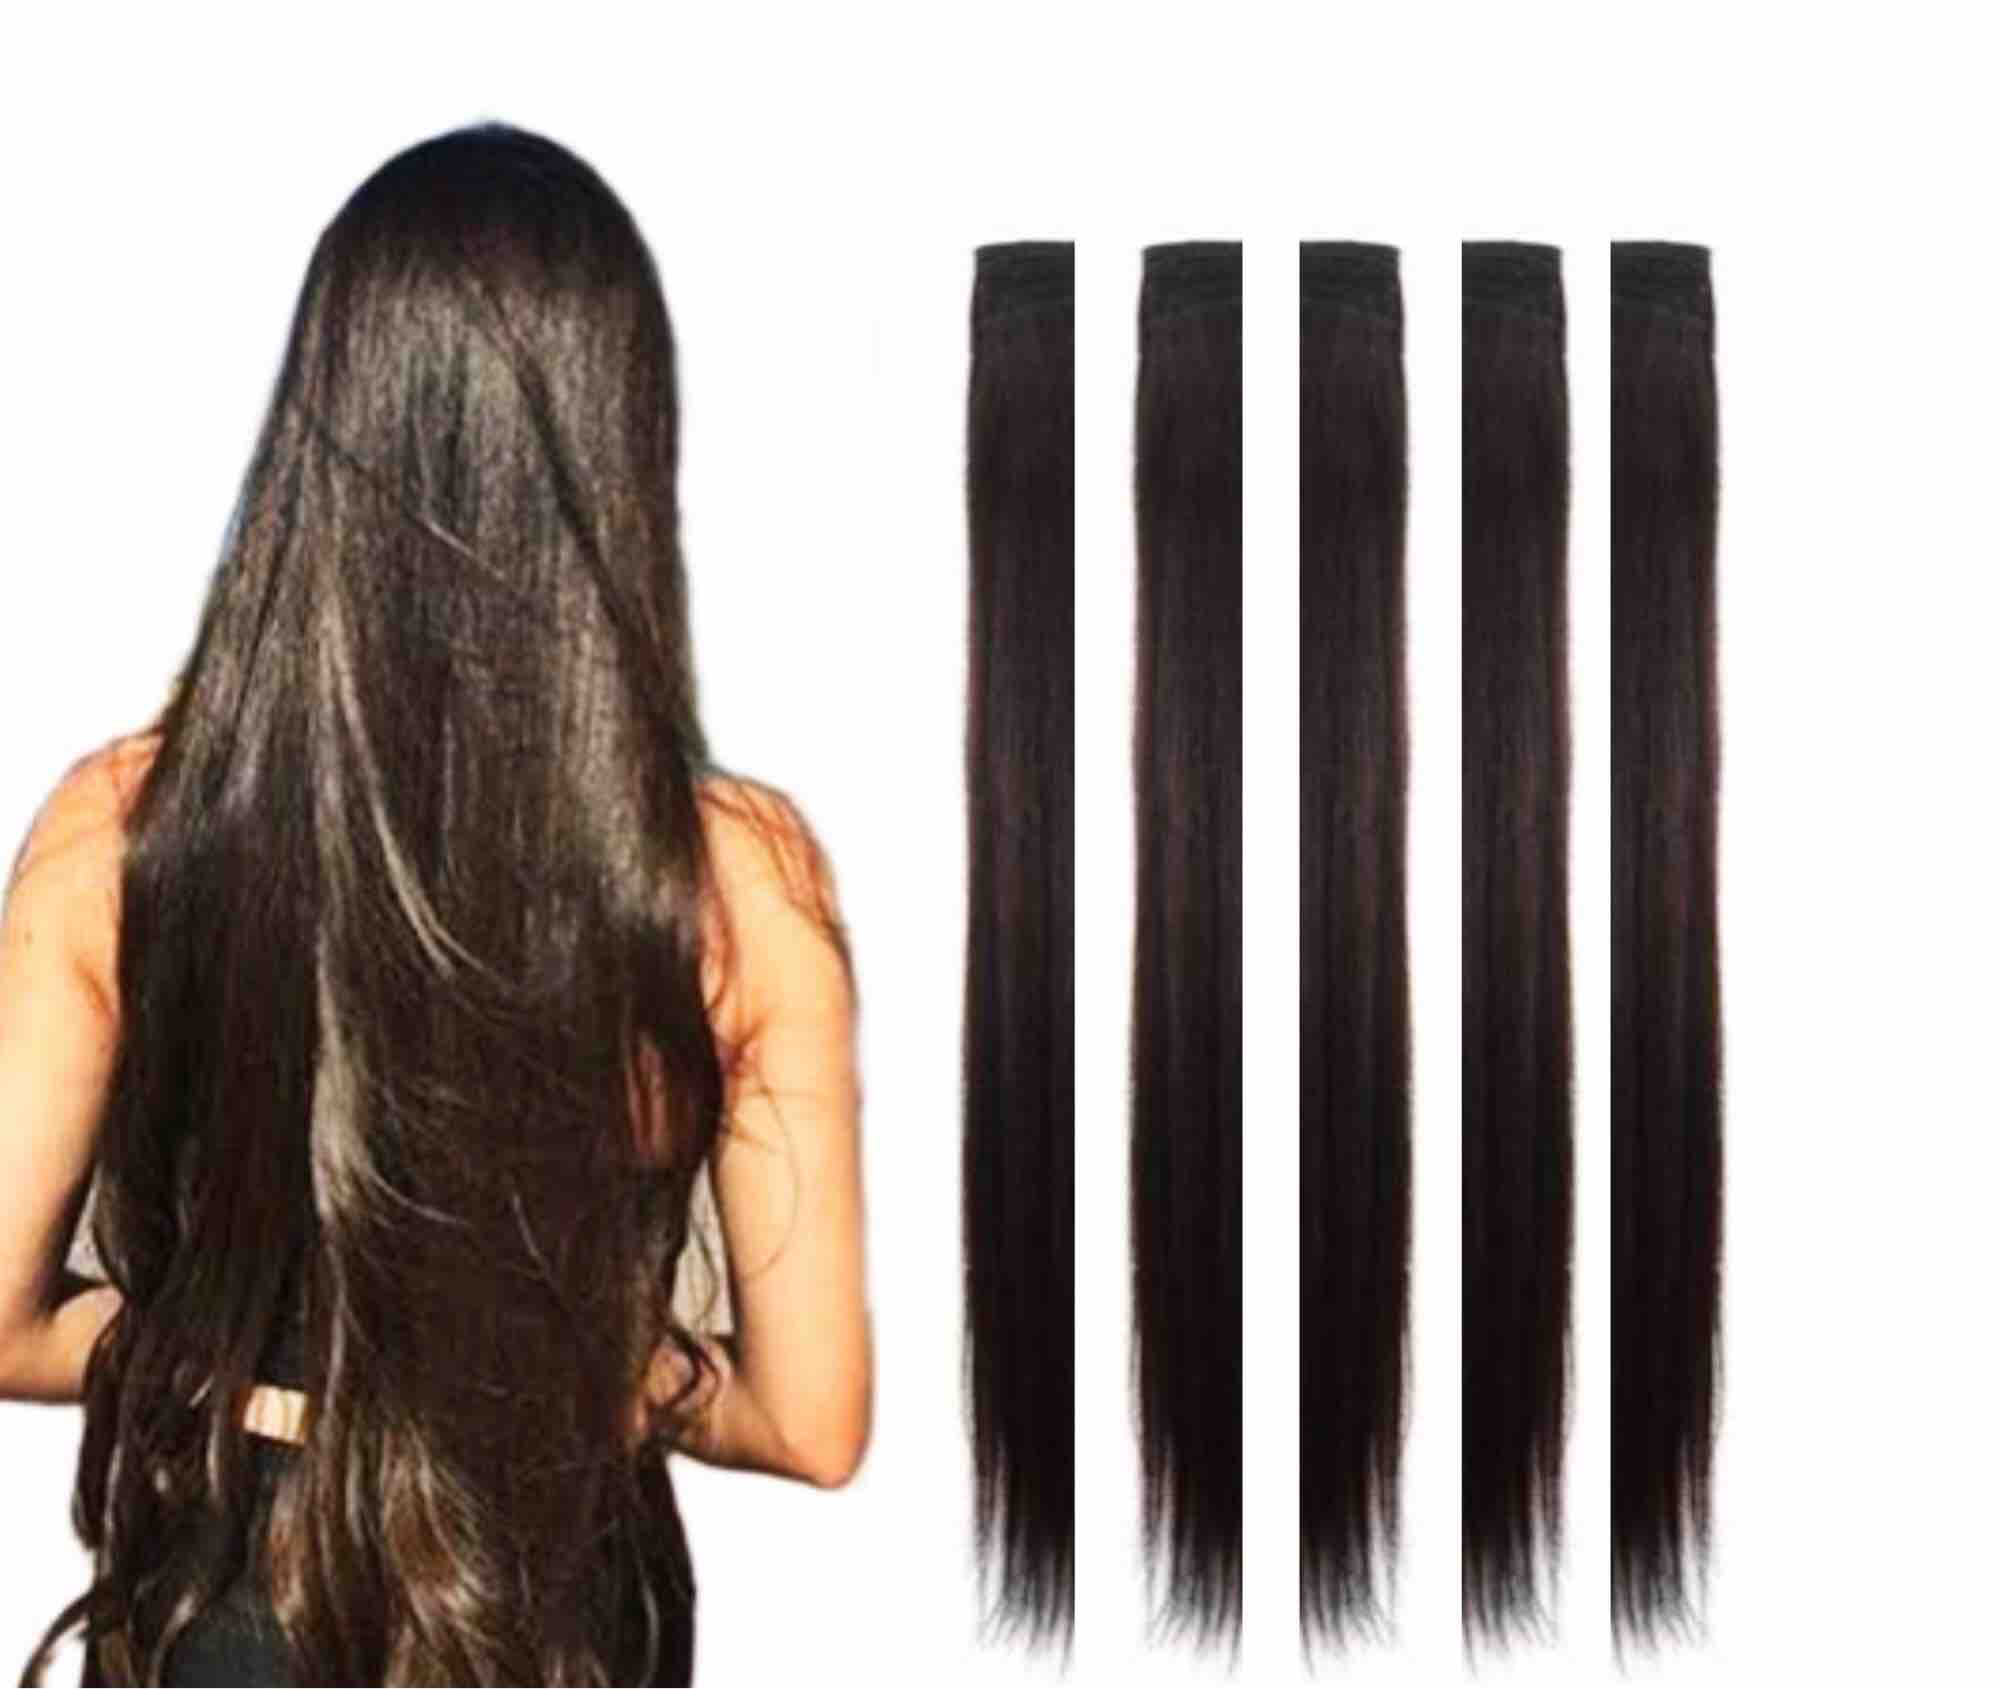 5 single clips long hairs strips - Dark brown single clip hair extension  for girls: Buy Online at Best Prices in Pakistan 